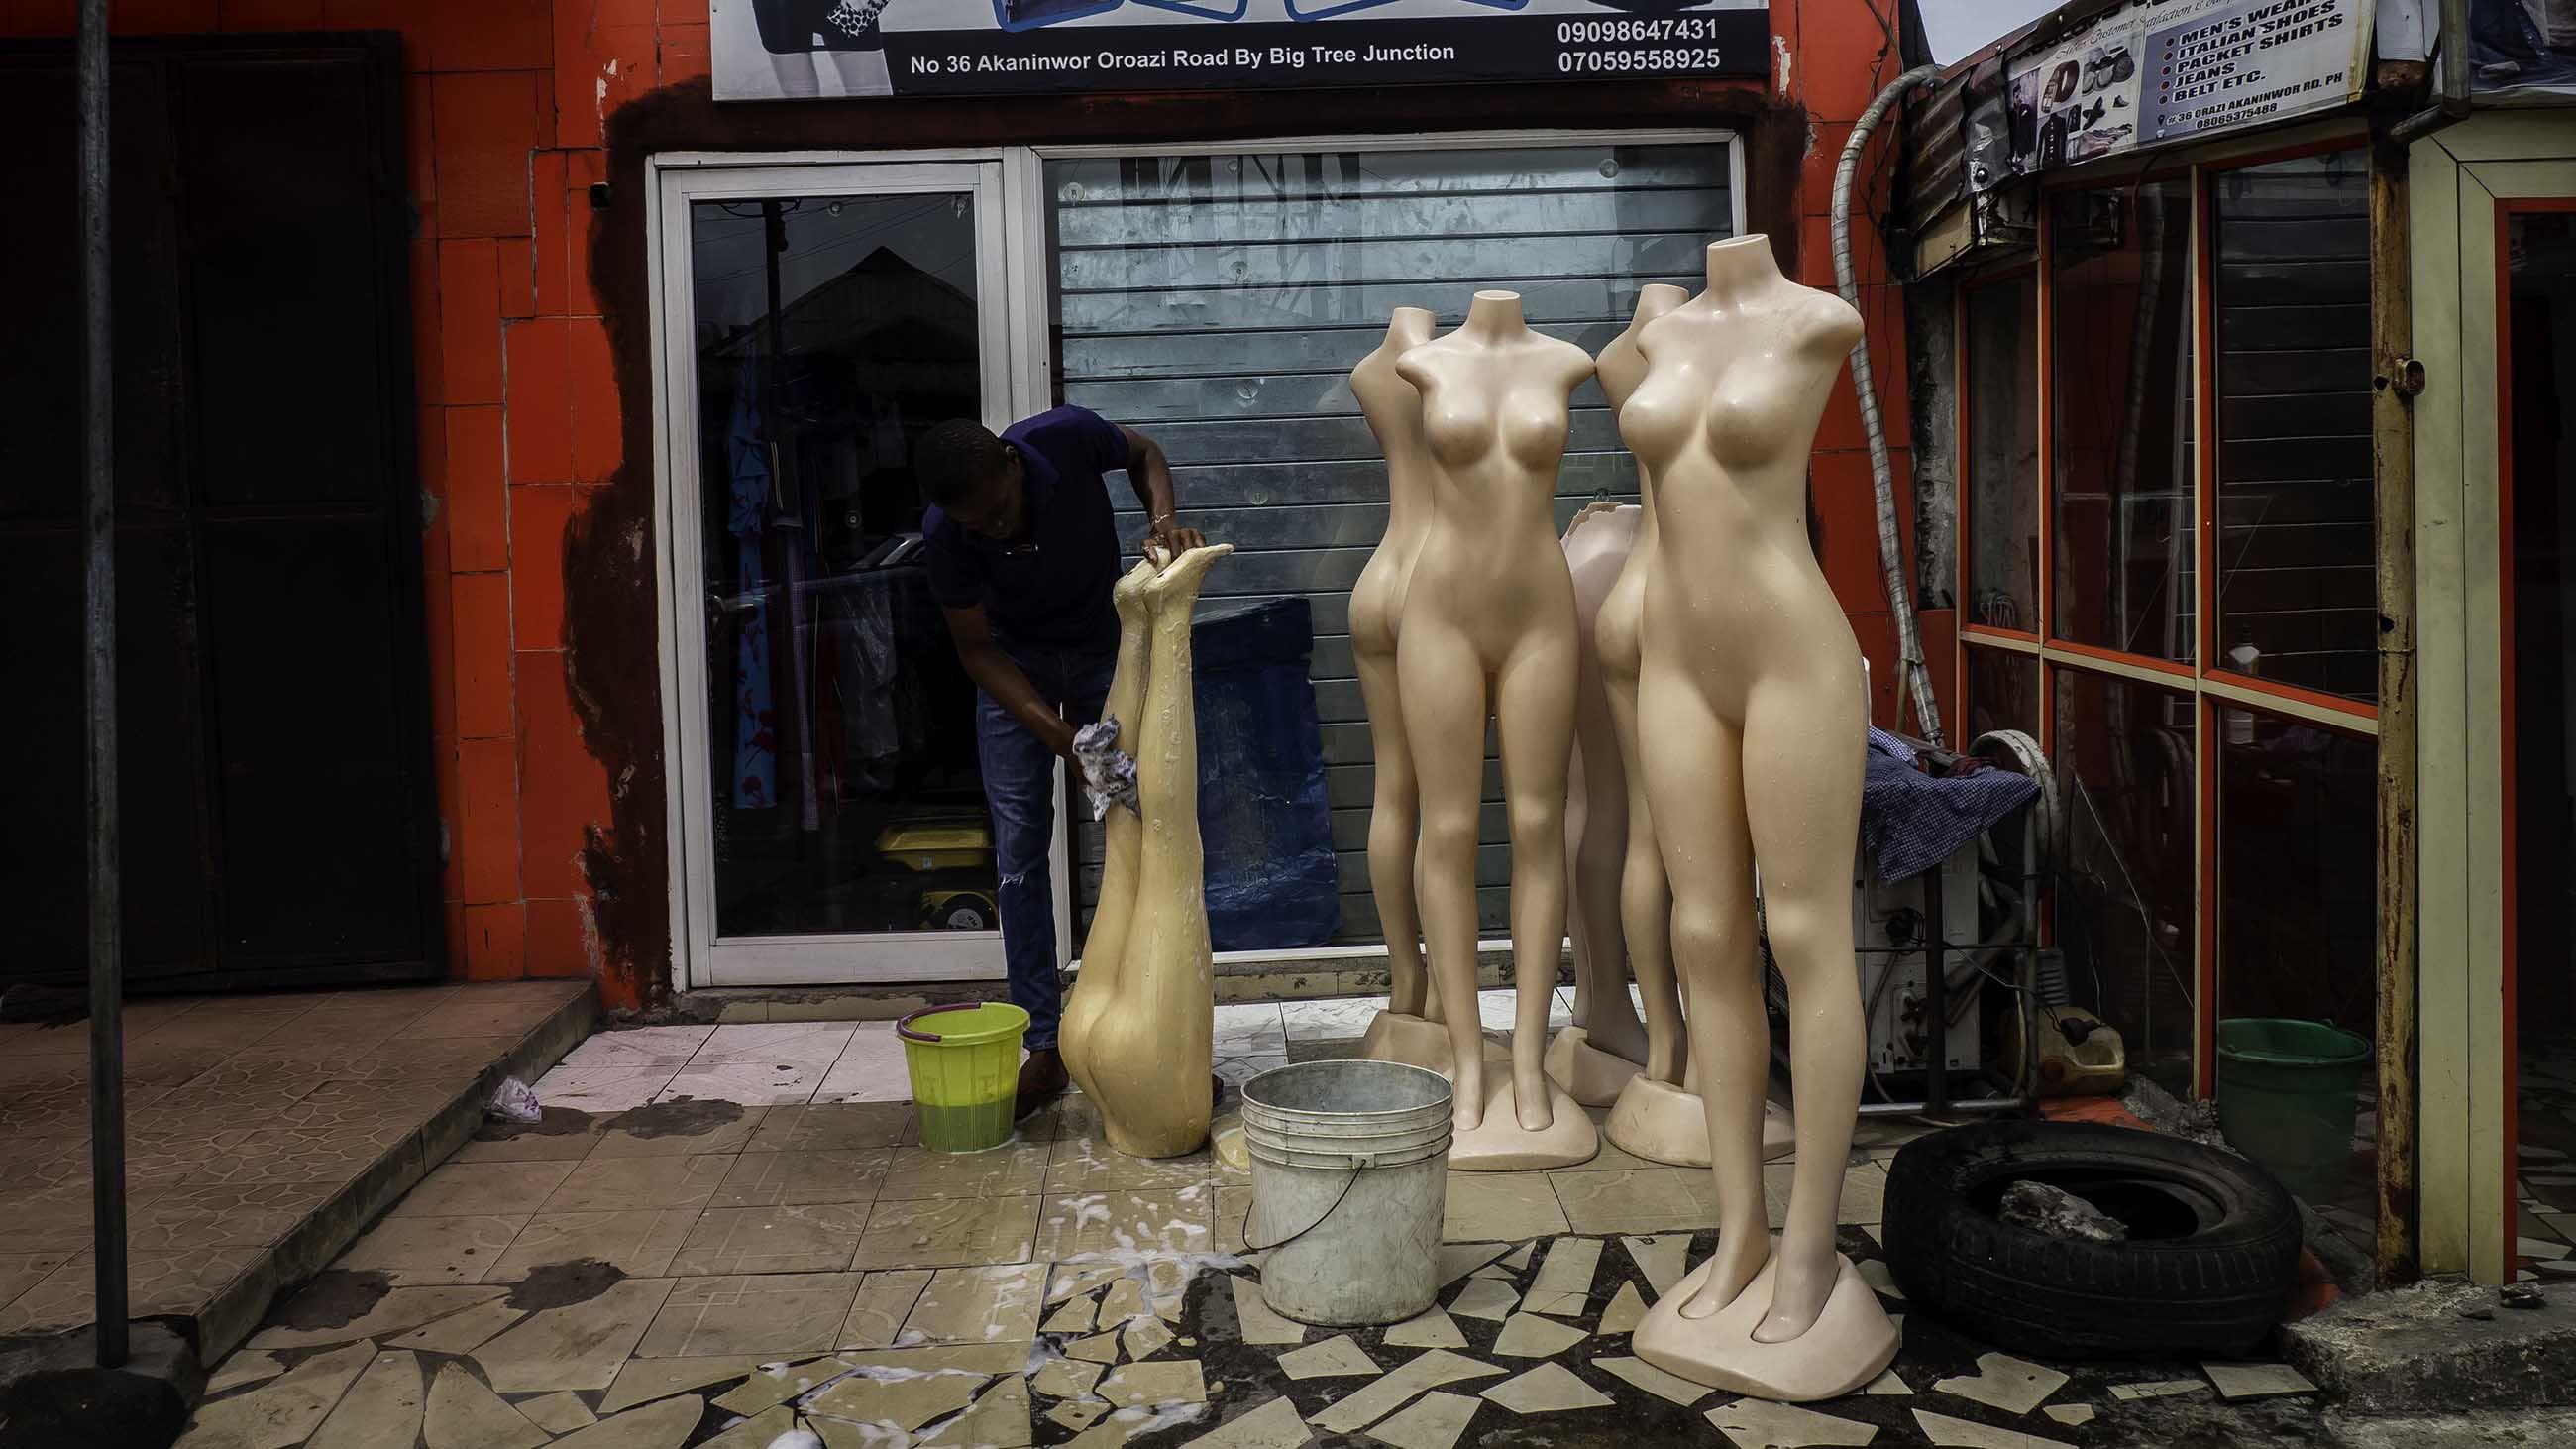 Soot covers everything—buildings, plants, and people. Here, a shop keeper wipes soot off mannequins in front of his fashion store. Image by Larry C. Price. Nigeria, 2018.